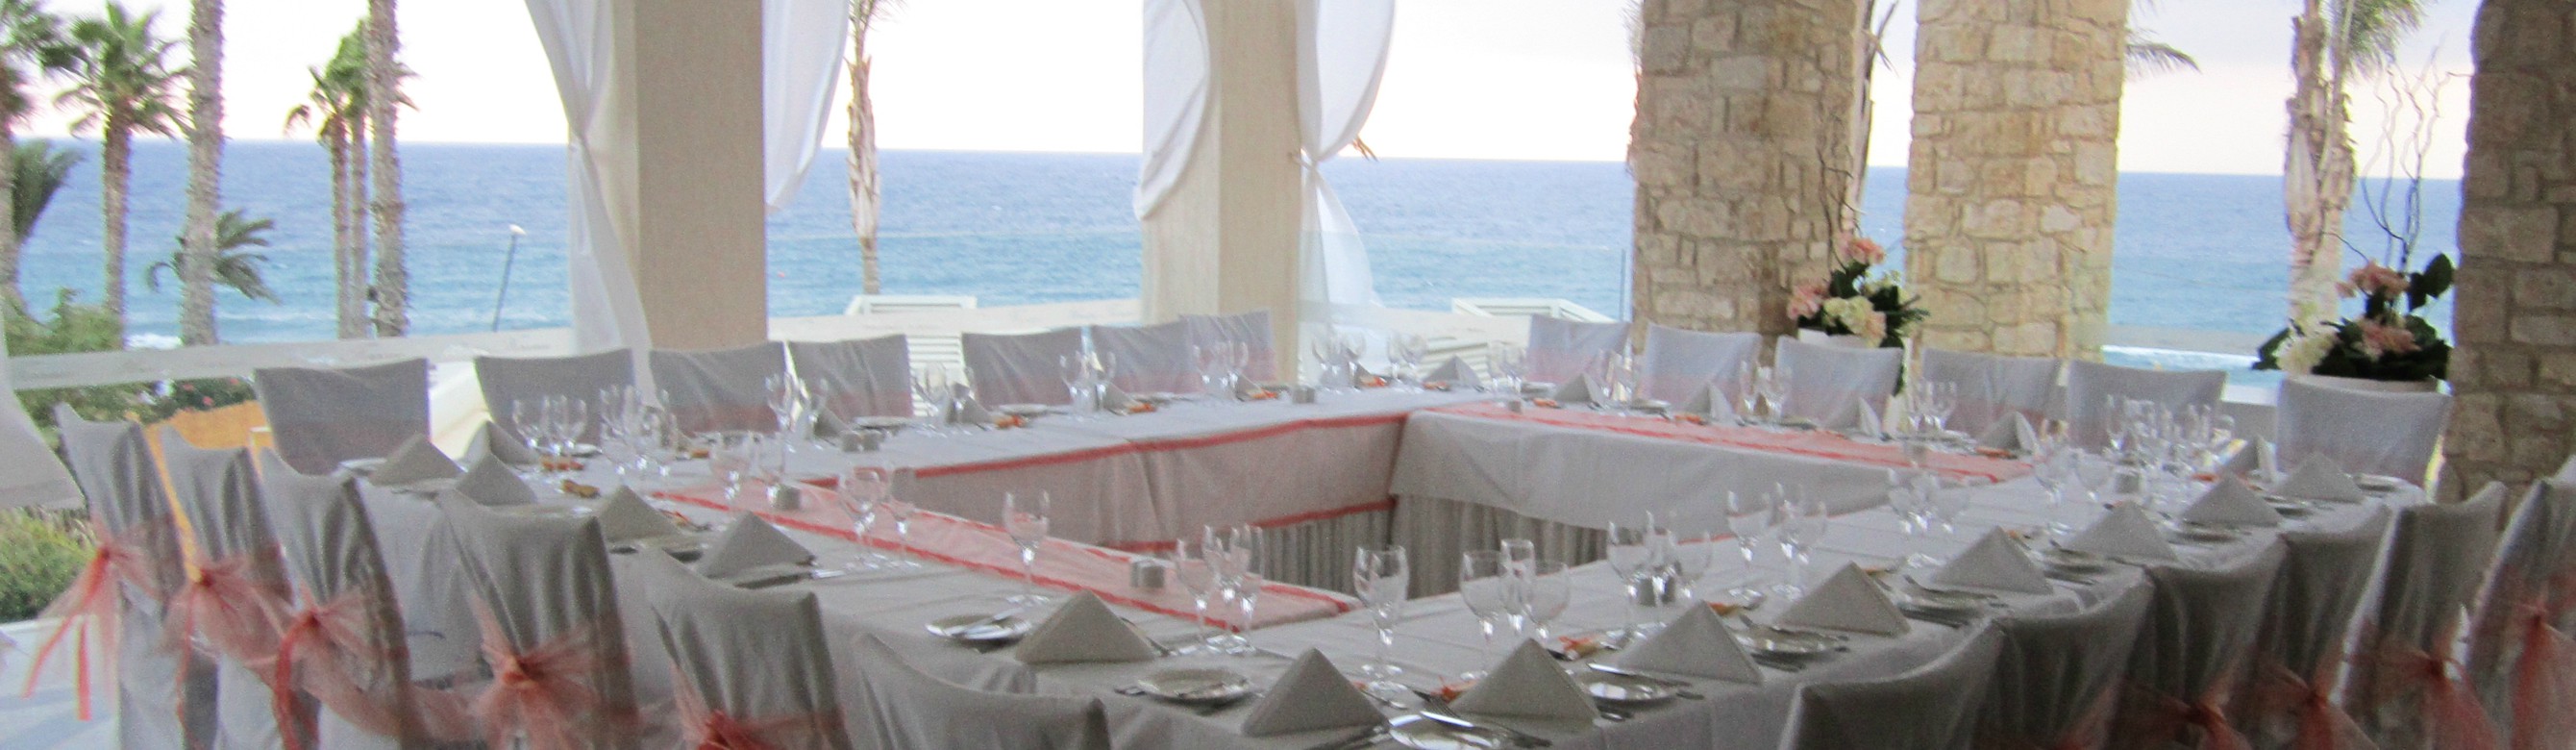 Book your wedding day in Alexander The Great Beach Hotel Paphos